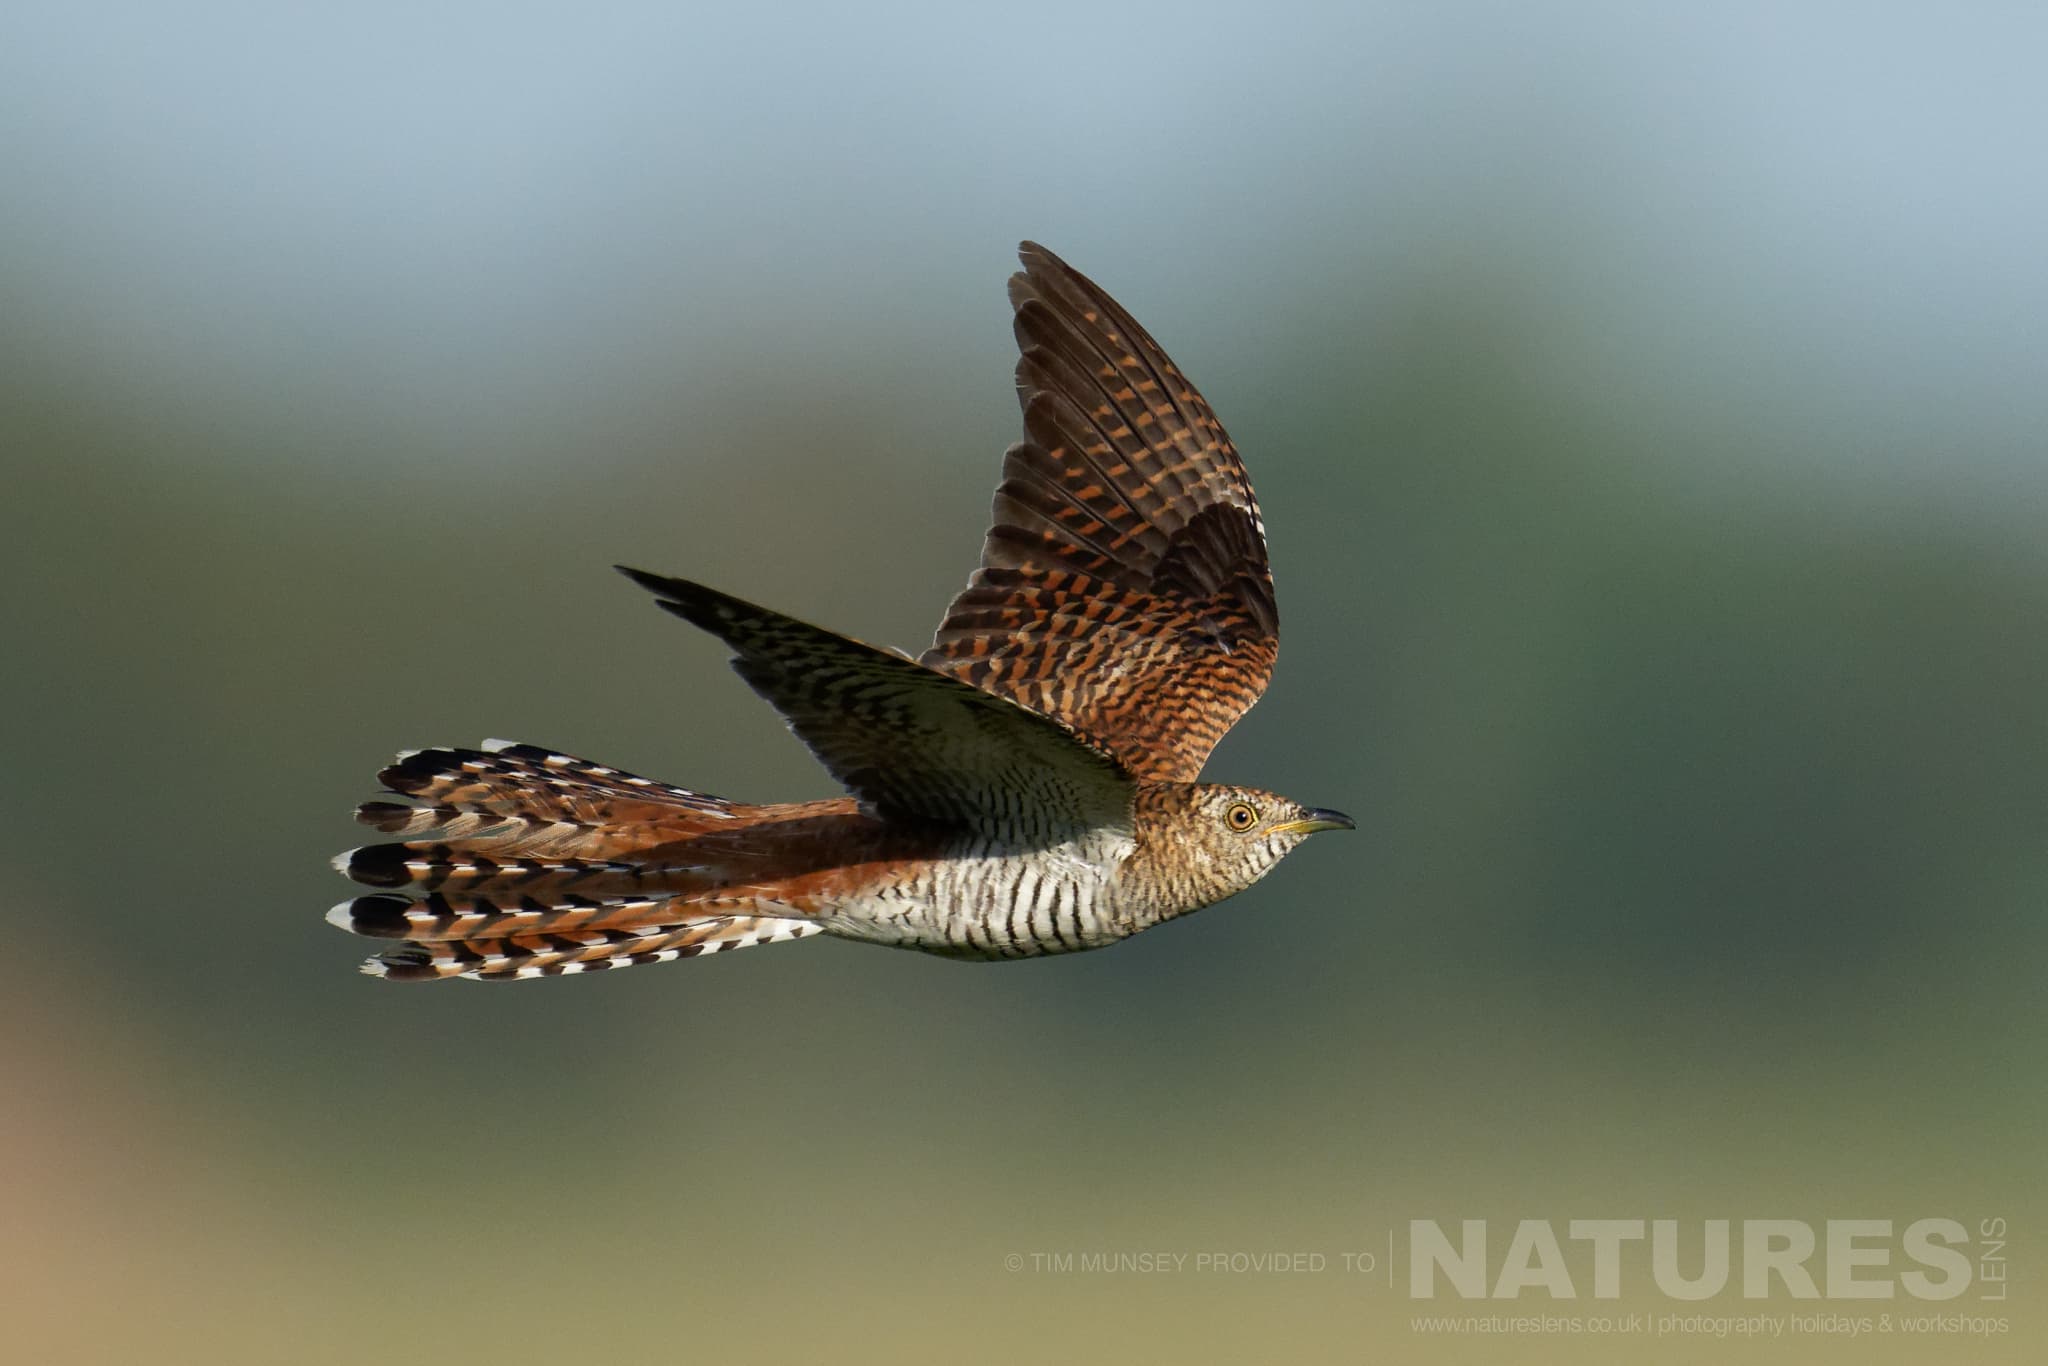 A Female Common Cuckoo In Flight One Of The Species That Features On The Natureslens Birds Of The Danube Delta Photography Holiday